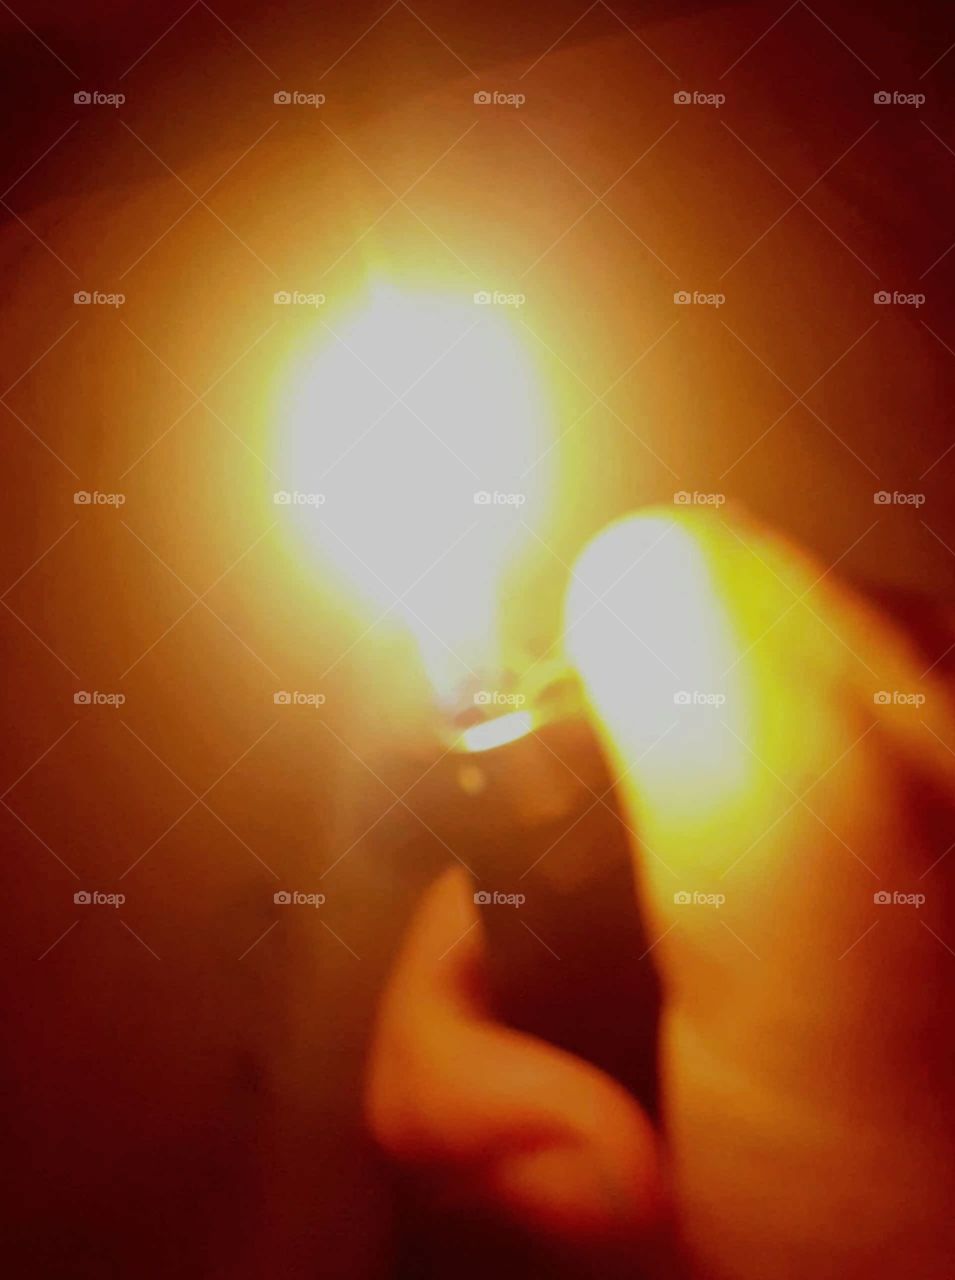 Lighter flame in a dark room with a brown background